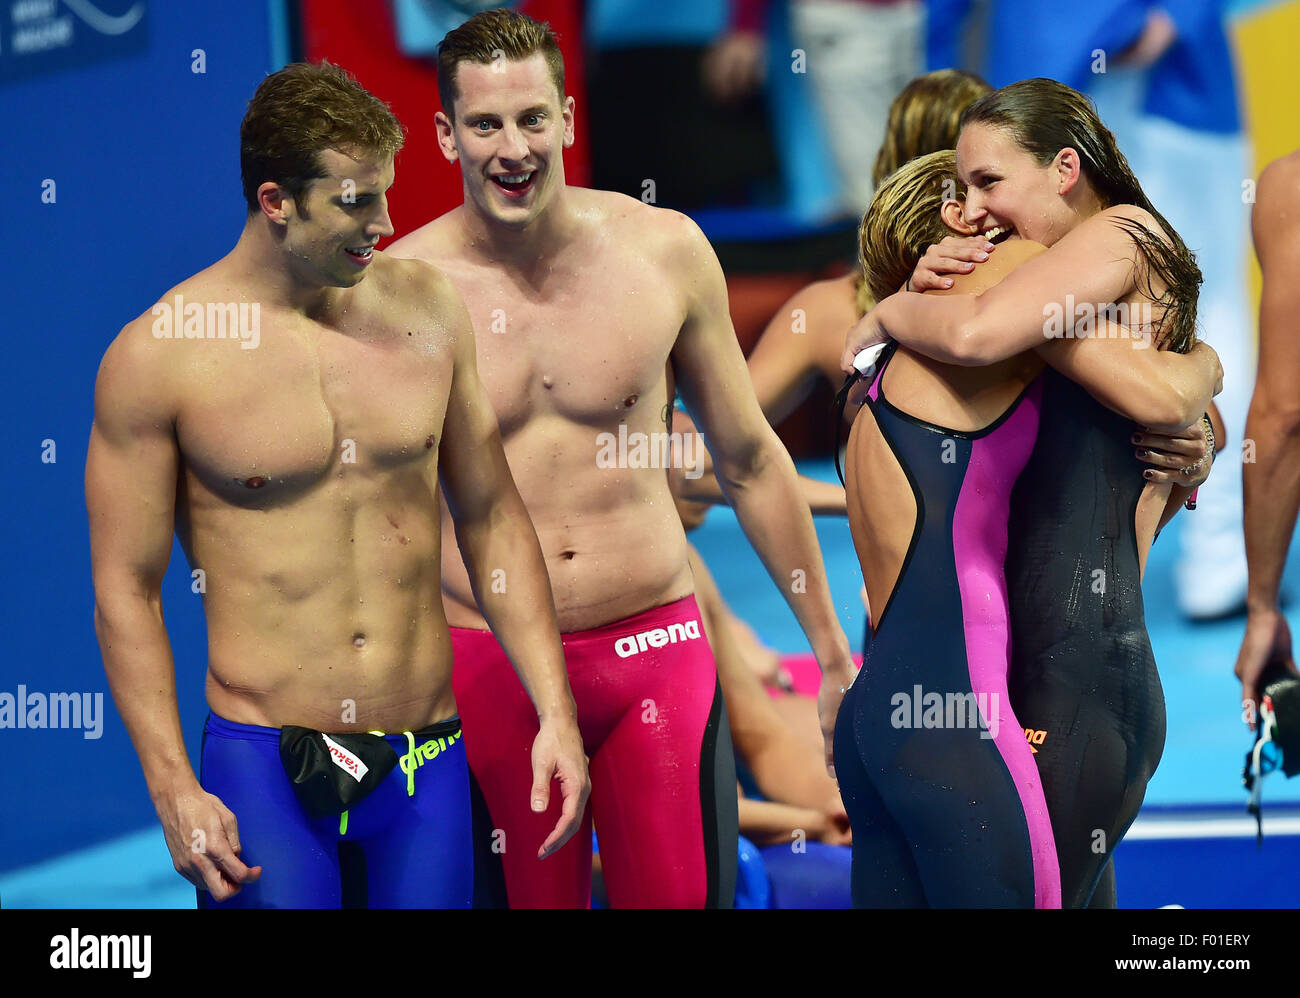 Kazan, Russia. 05th Aug, 2015. Bronze medalist's Annika Bruhn (R-L), Alexandra Wenk, Jan-Philip Glania and Hendrik Feldwehr of Germany celebrate after the Mixed 4x100m Medley Relay final of the 16th FINA Swimming World Championships at Kazan Arena in Kazan, Russia, 05 August 2015. Photo: Martin Schutt/dpa/Alamy Live News Stock Photo